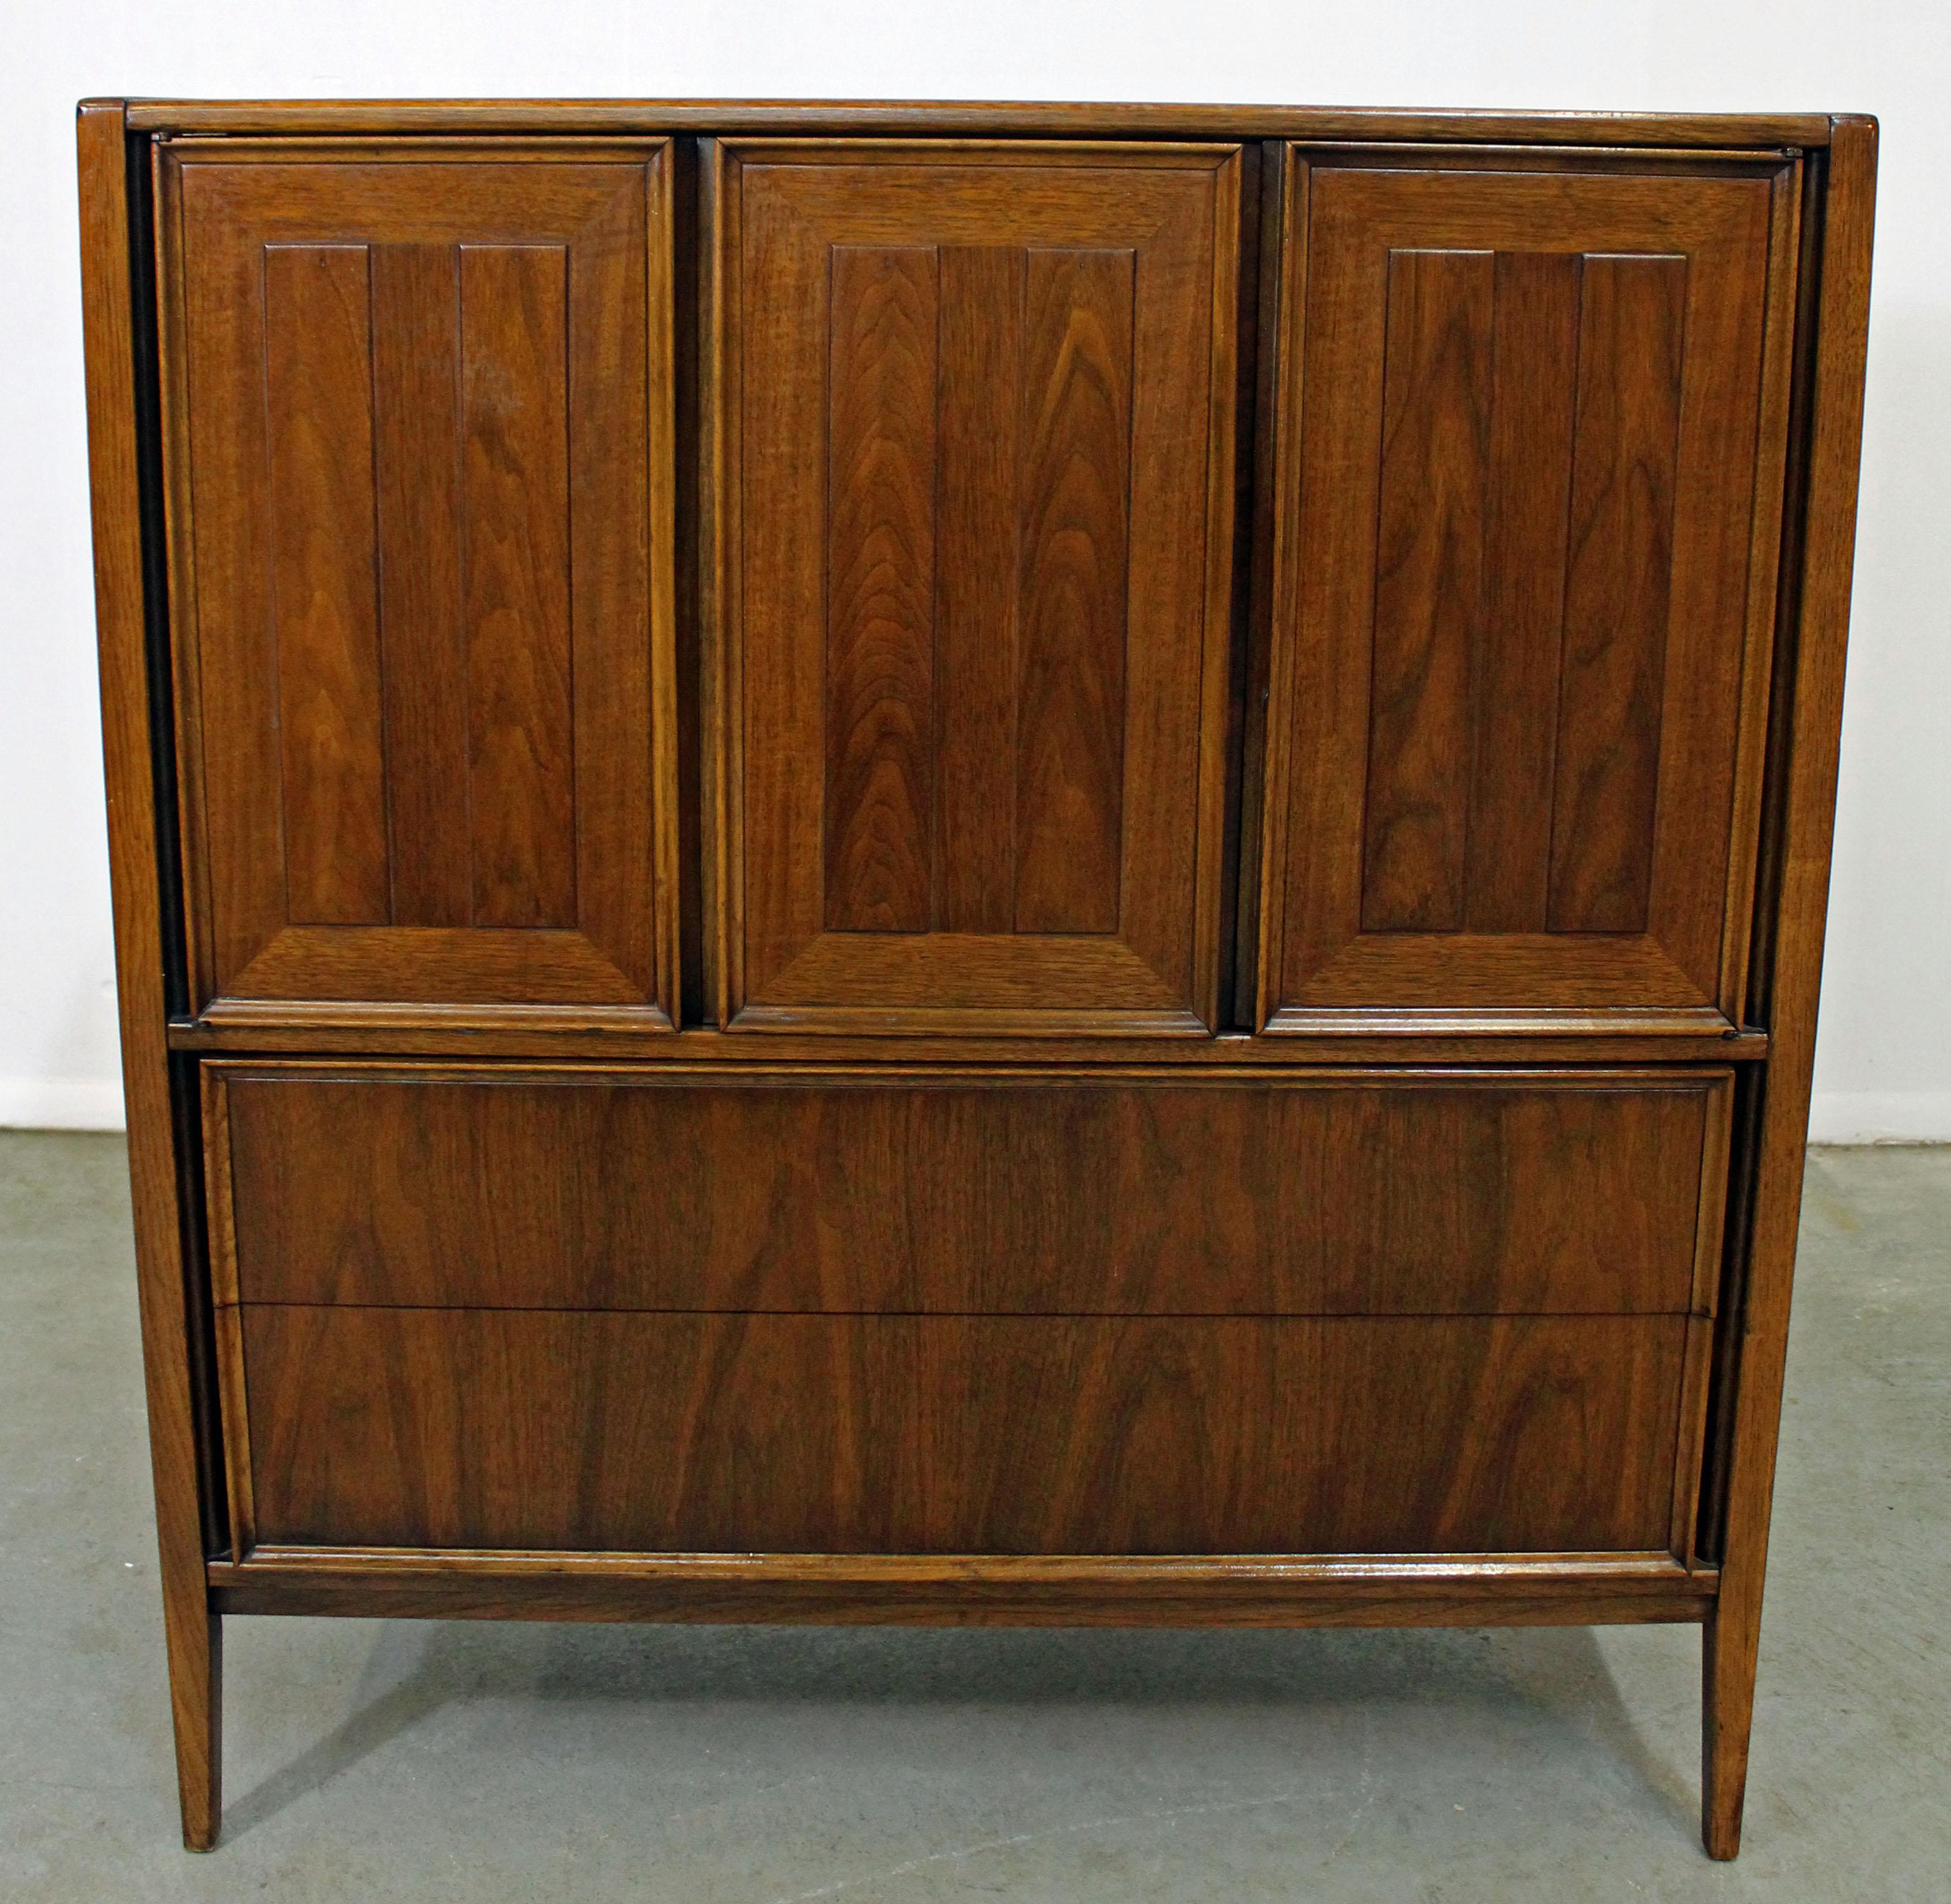 Offered is a Mid-Century Modern walnut tall chest or armoire. Includes five drawers altogether with three doors on top. Top drawer has a divider. It is in good condition, shows some wear (age wear, surface scratches/scuff marks- see photos), but